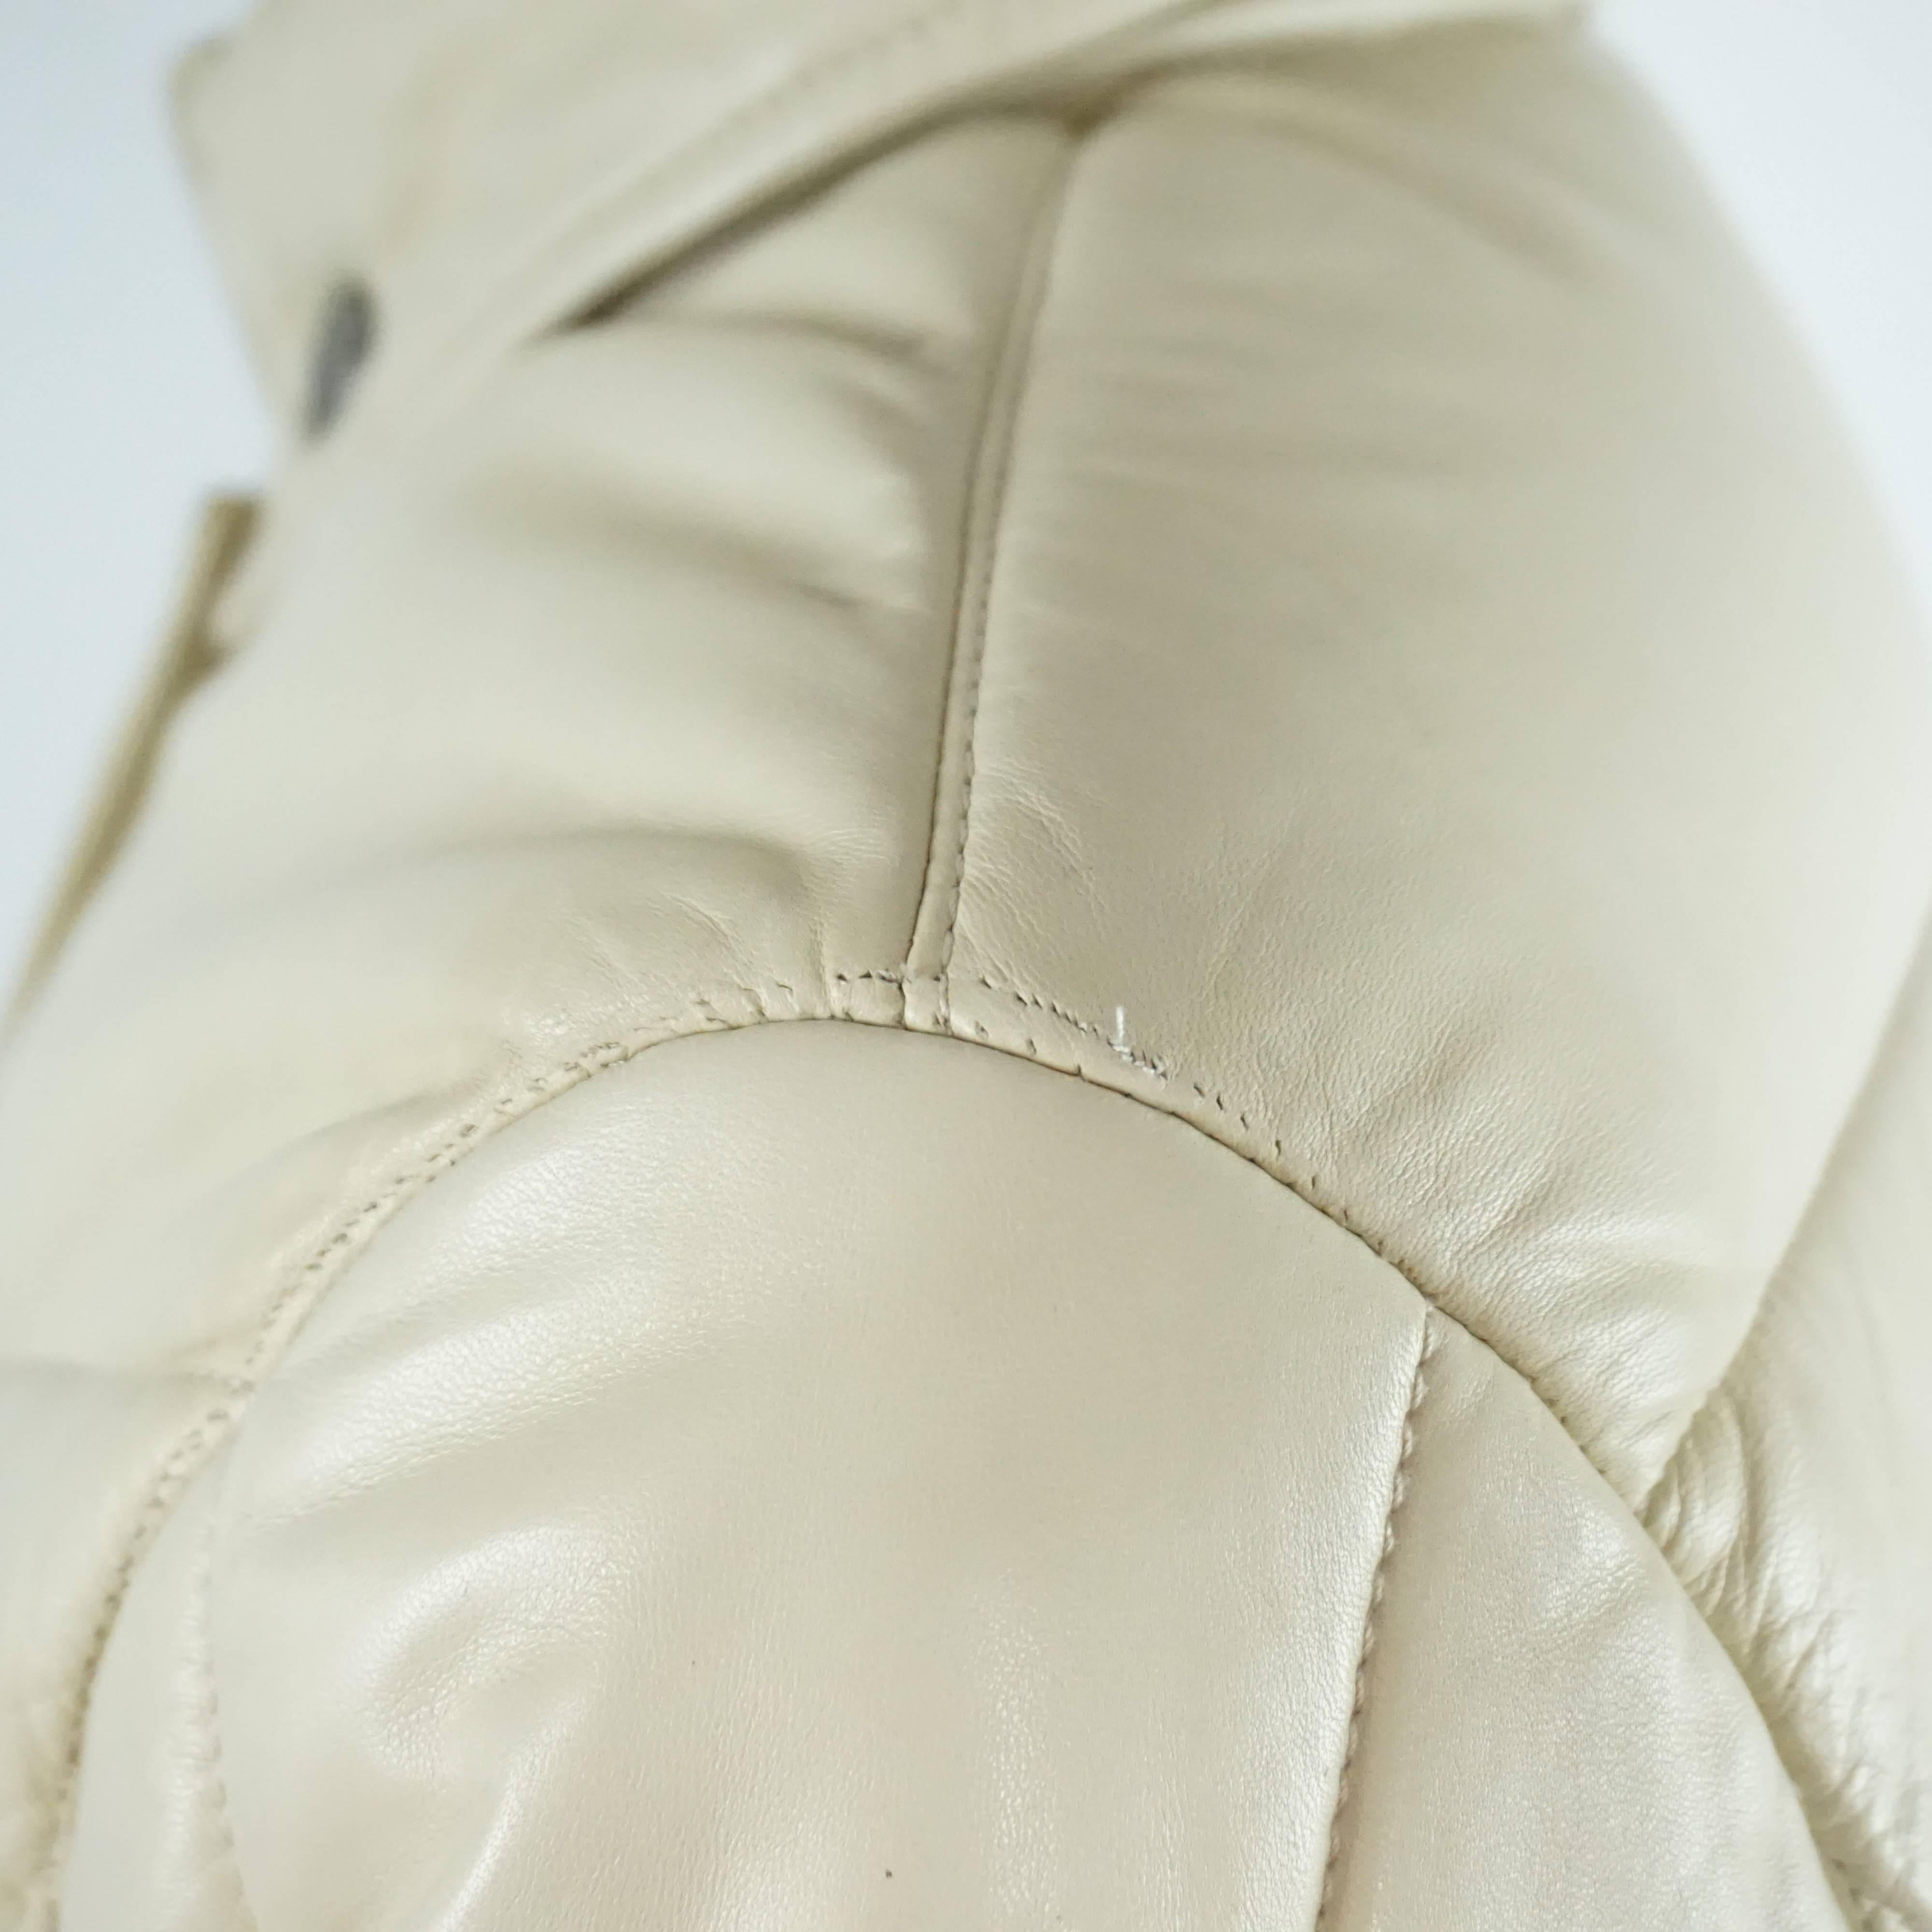 Gucci Bone Leather Puffer Jacket with Hood - 46 2